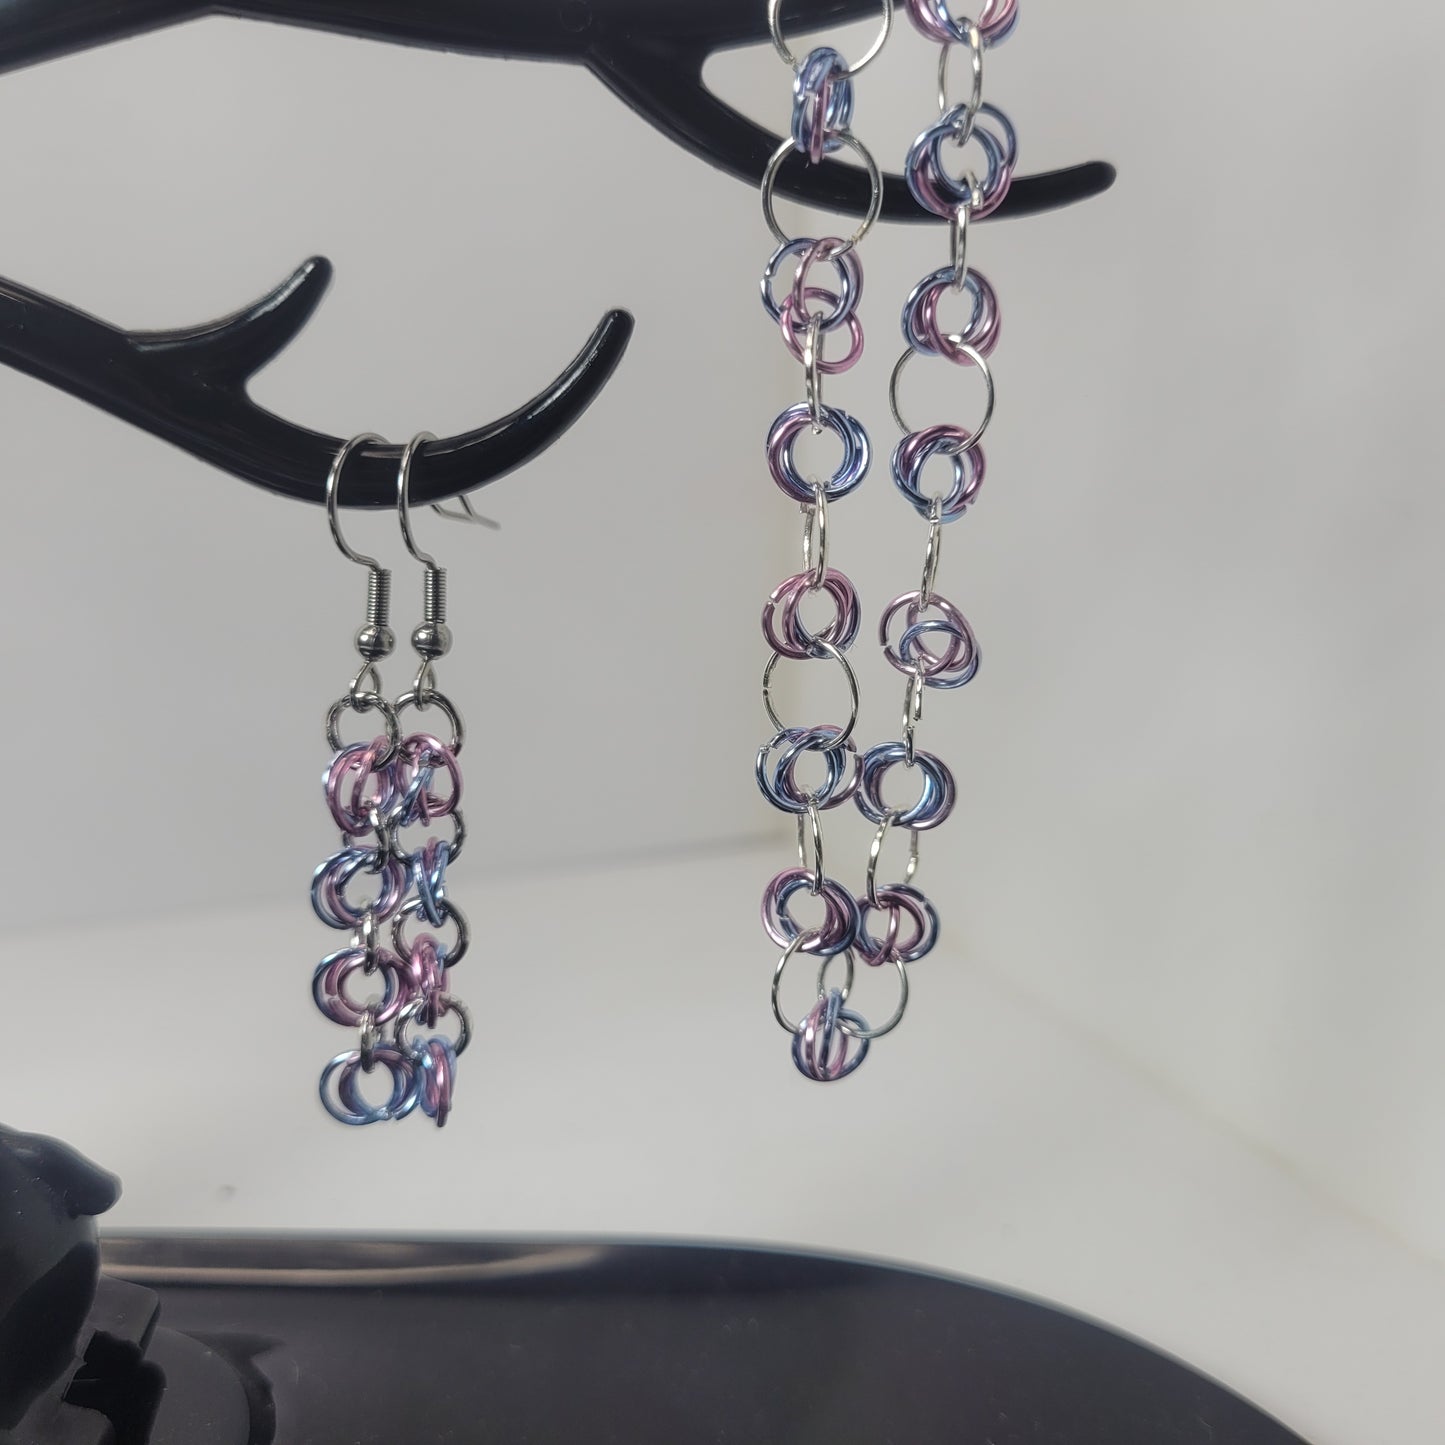 Earrings, light pink, light blue and silver chainmail